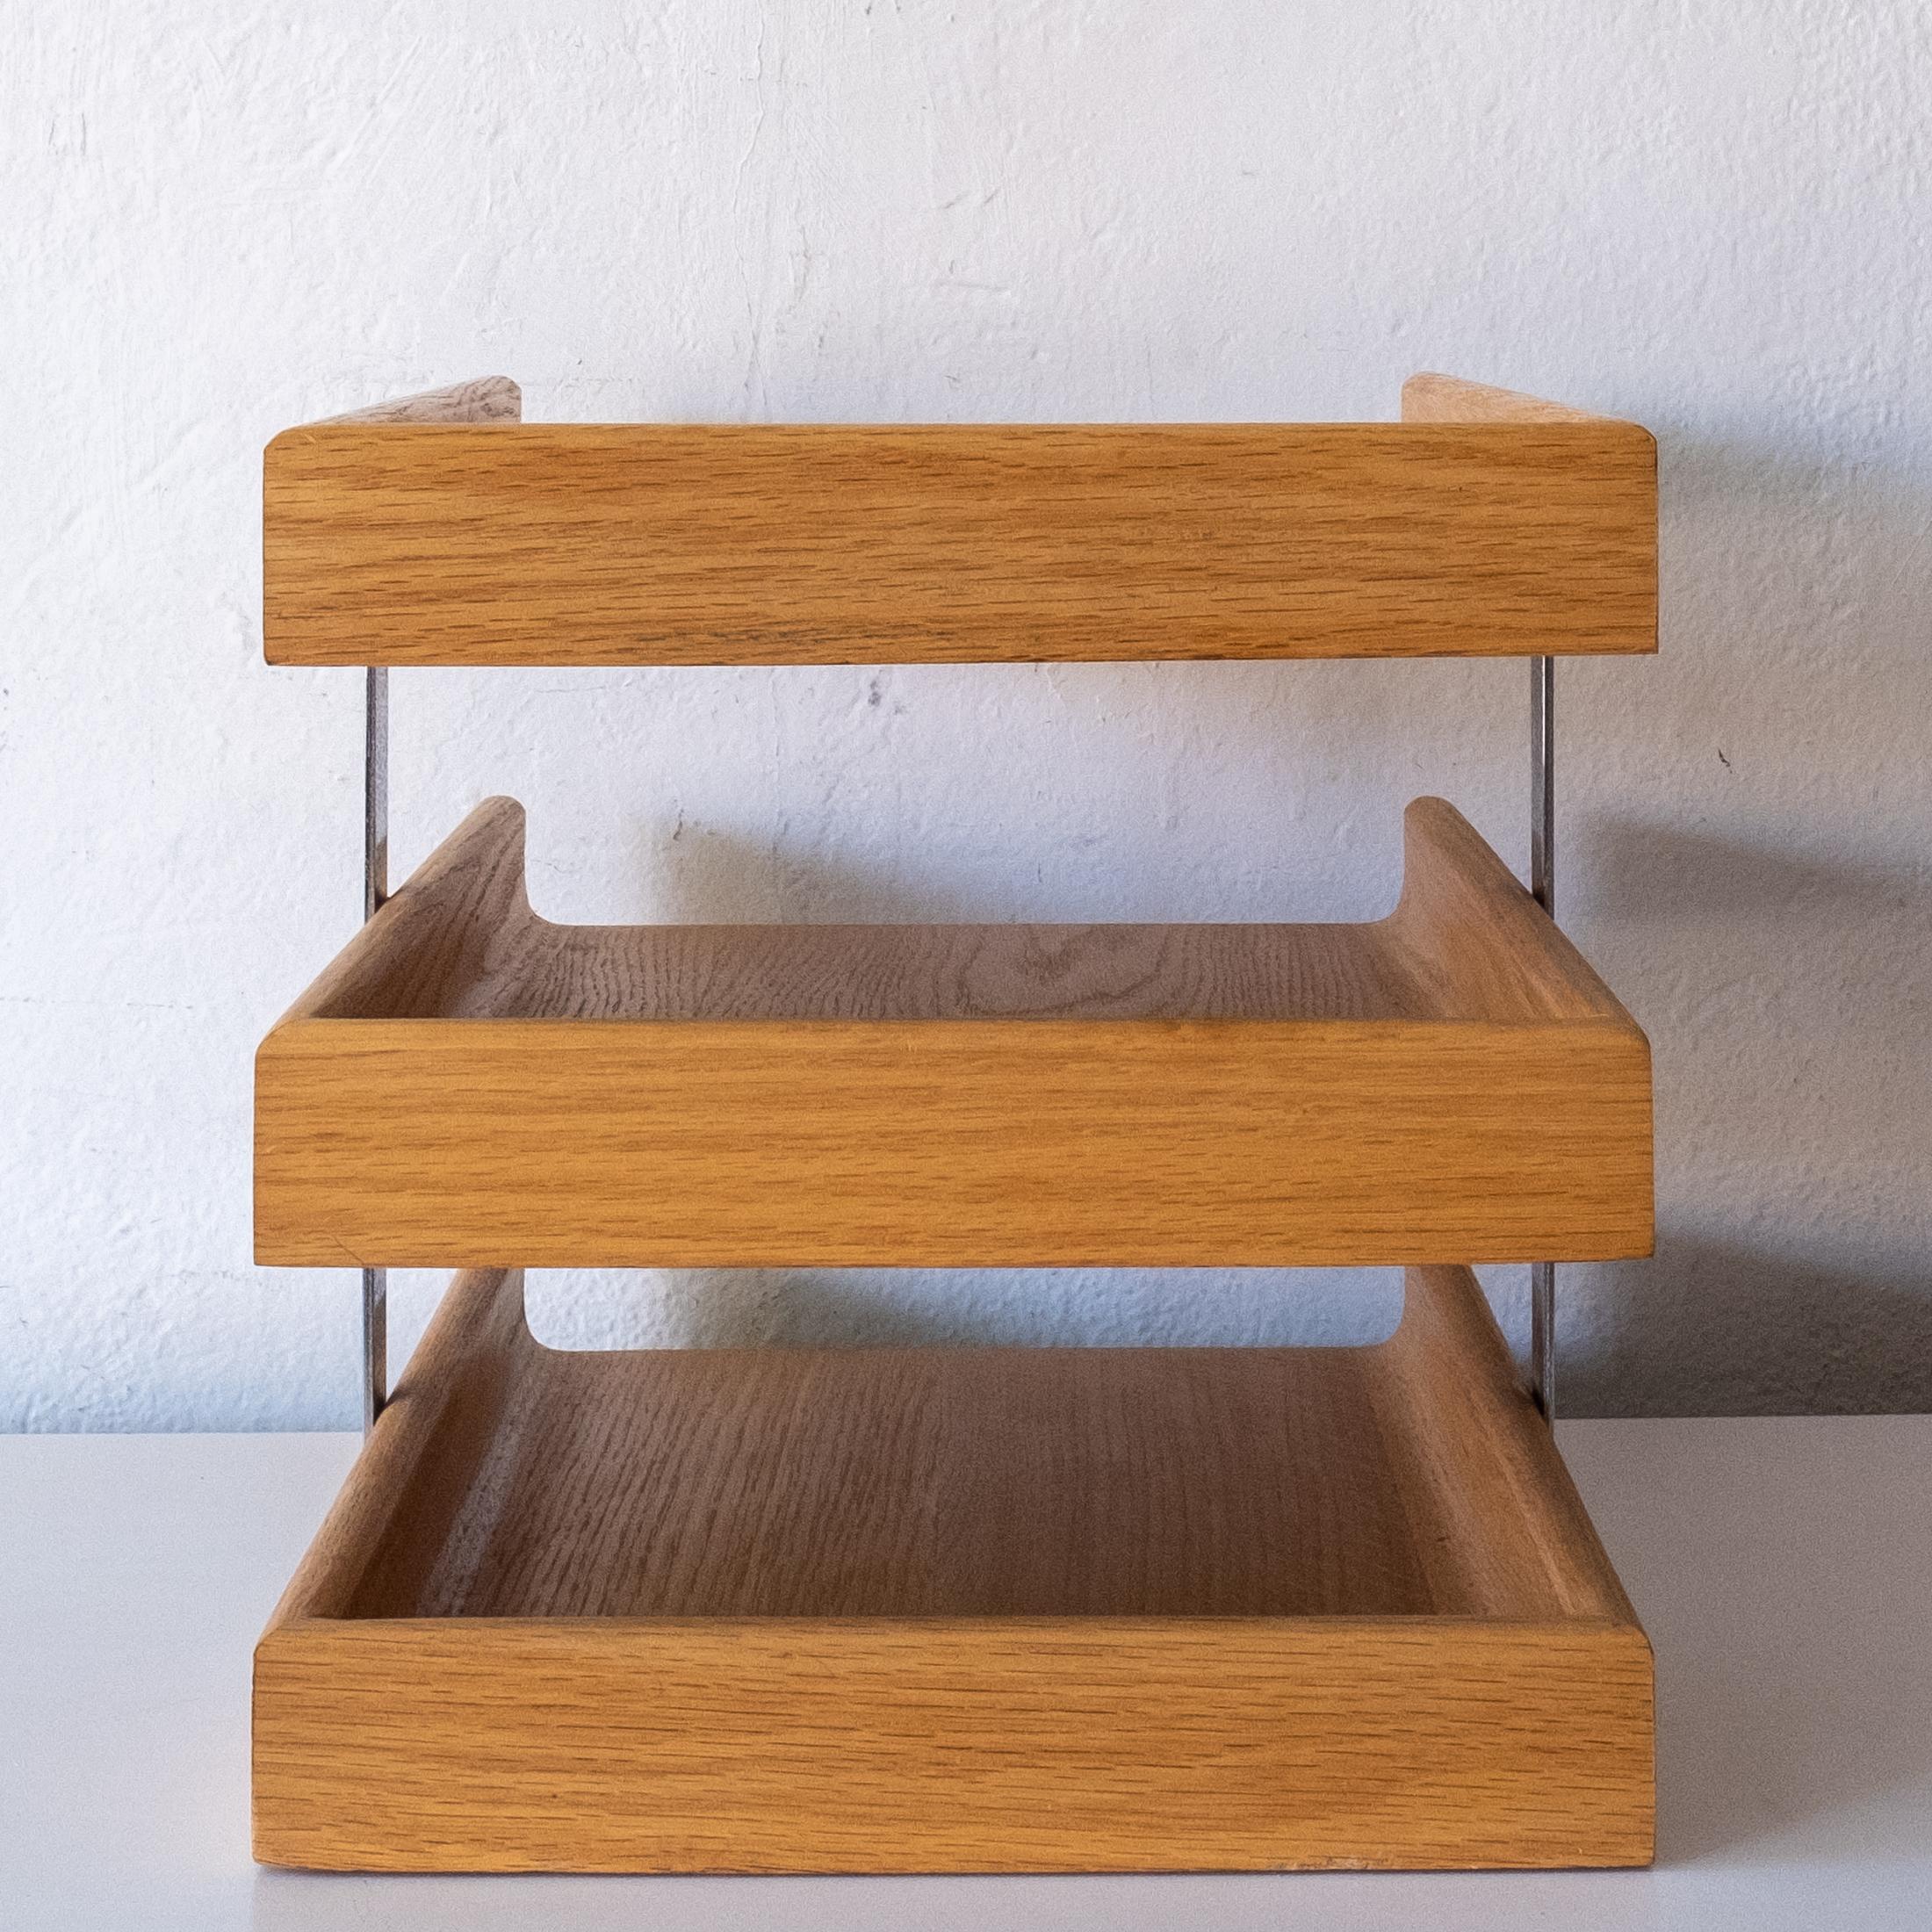 1970s Oak and Chrome Peter Pepper Letter Tray and Mail Holder In Good Condition For Sale In San Diego, CA